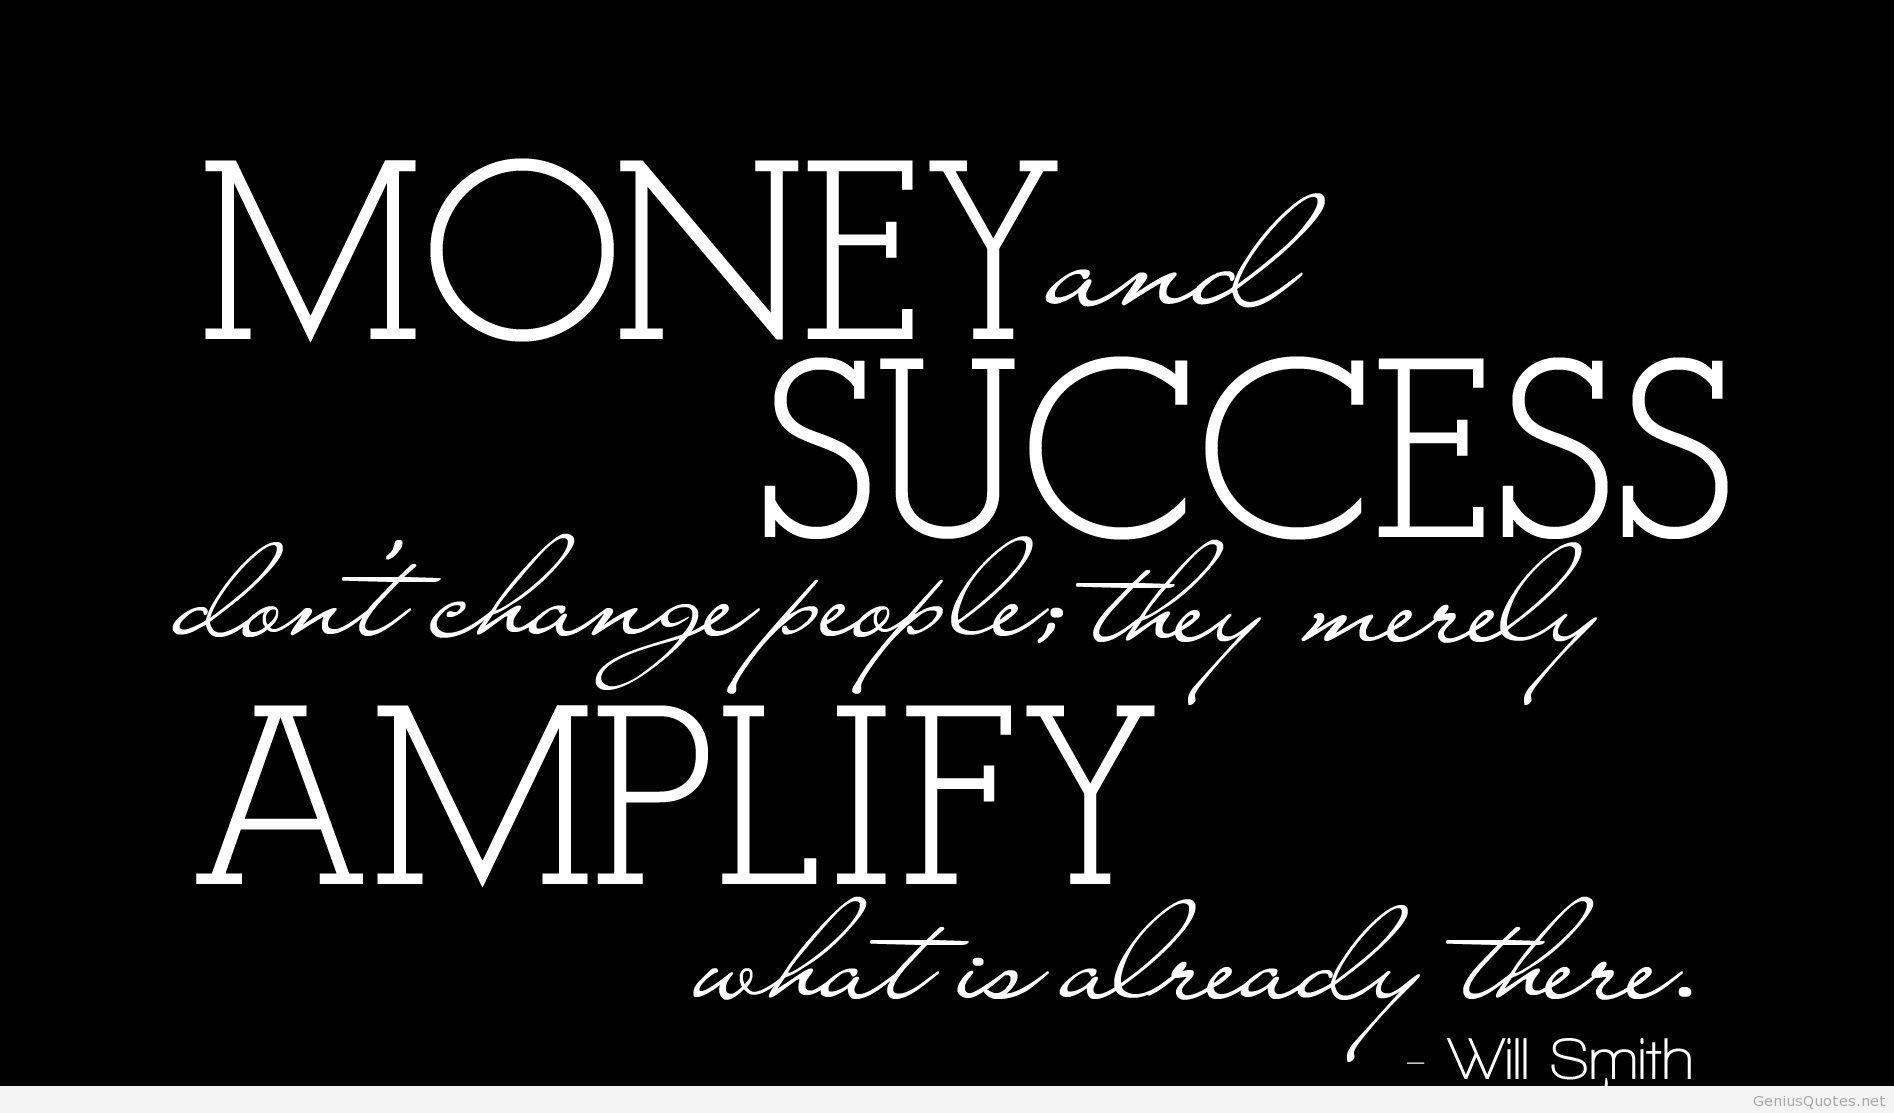 Funny quotes HD wallpaper about money and success